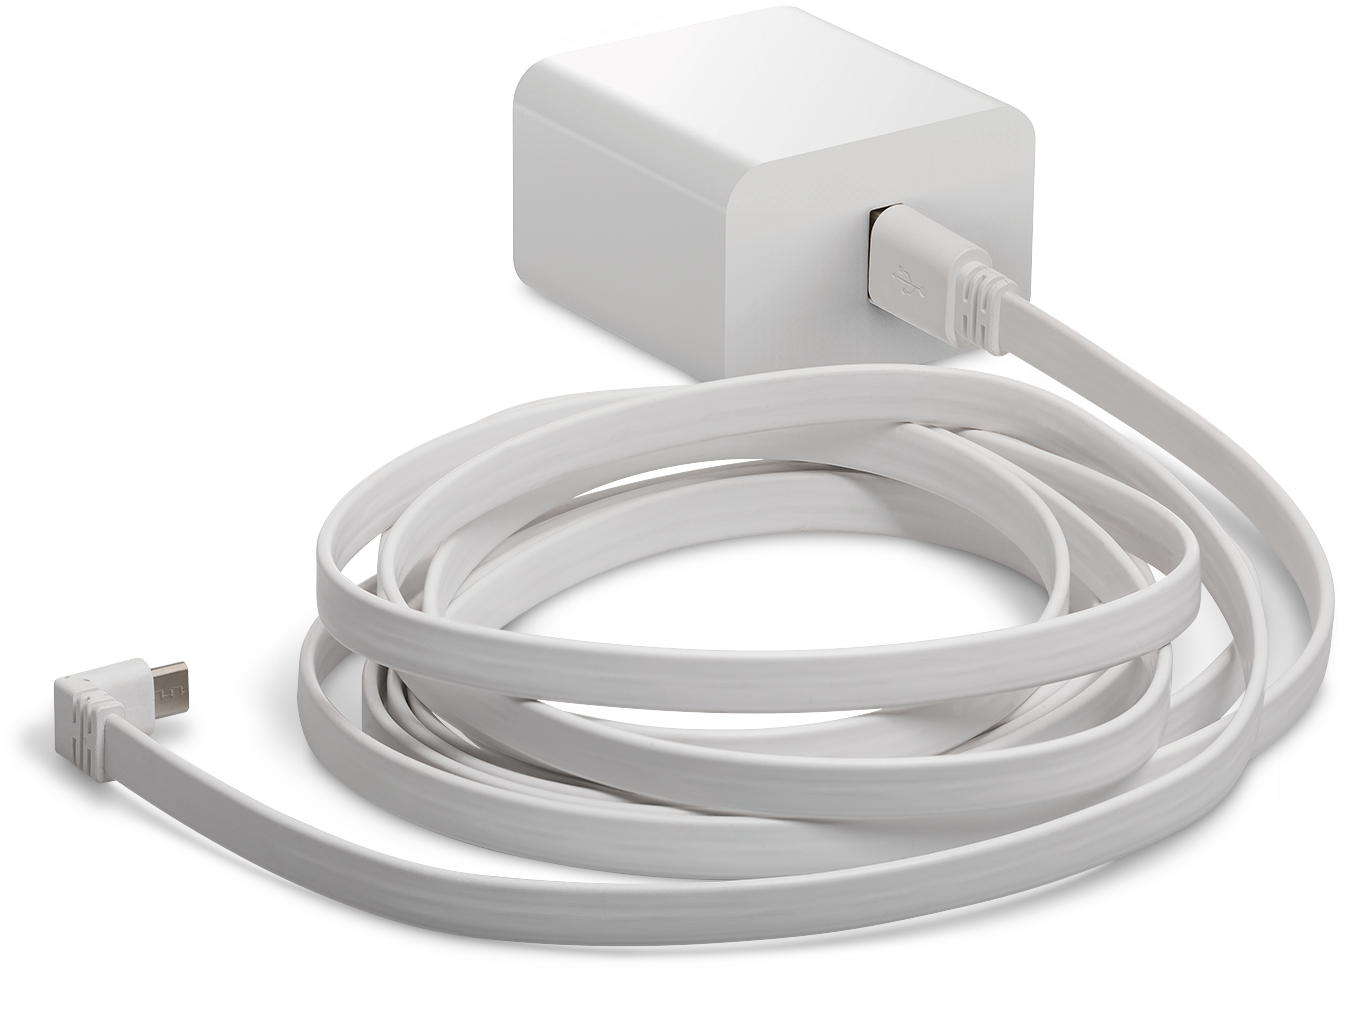 arlo pro 2 ethernet cable